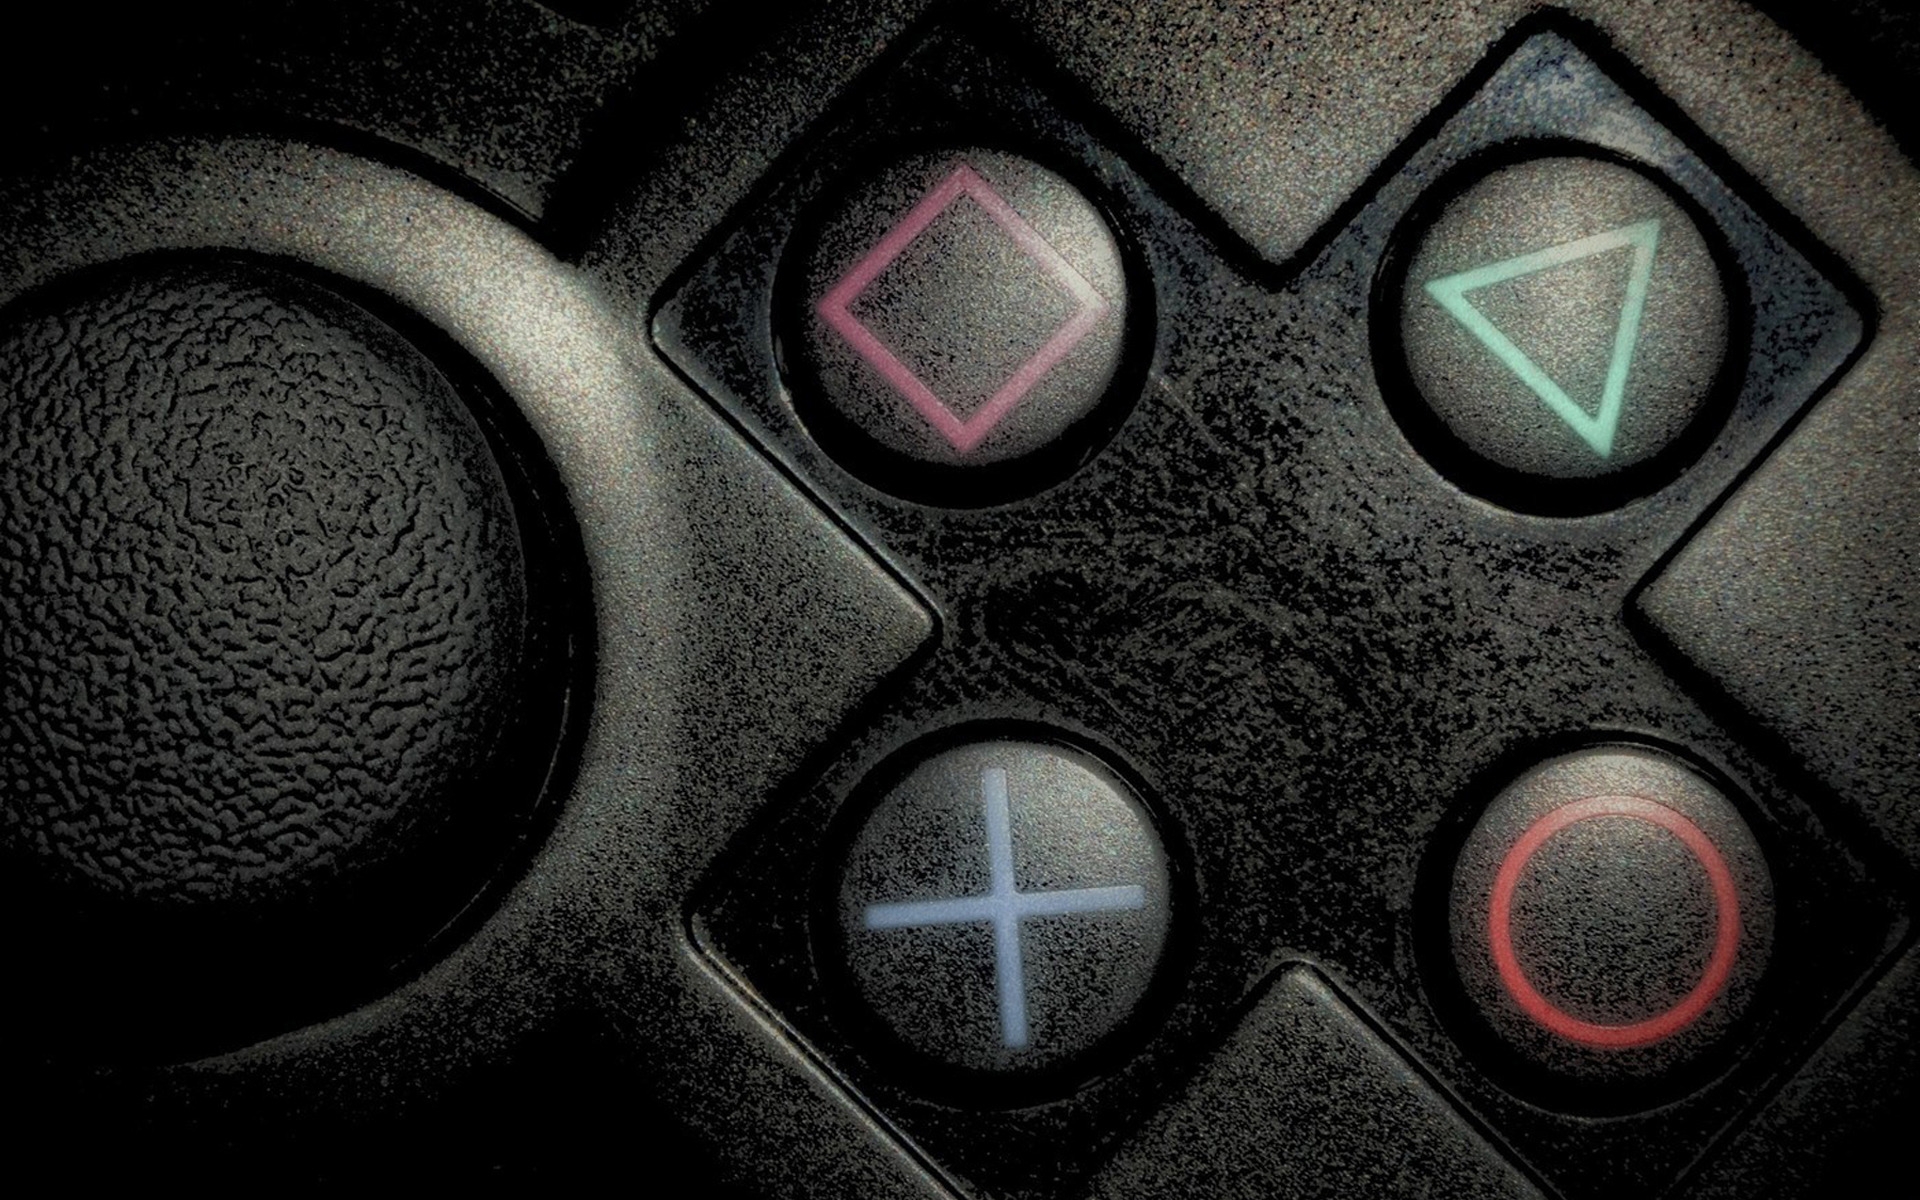 Playstation Buttons for 1920 x 1200 widescreen resolution